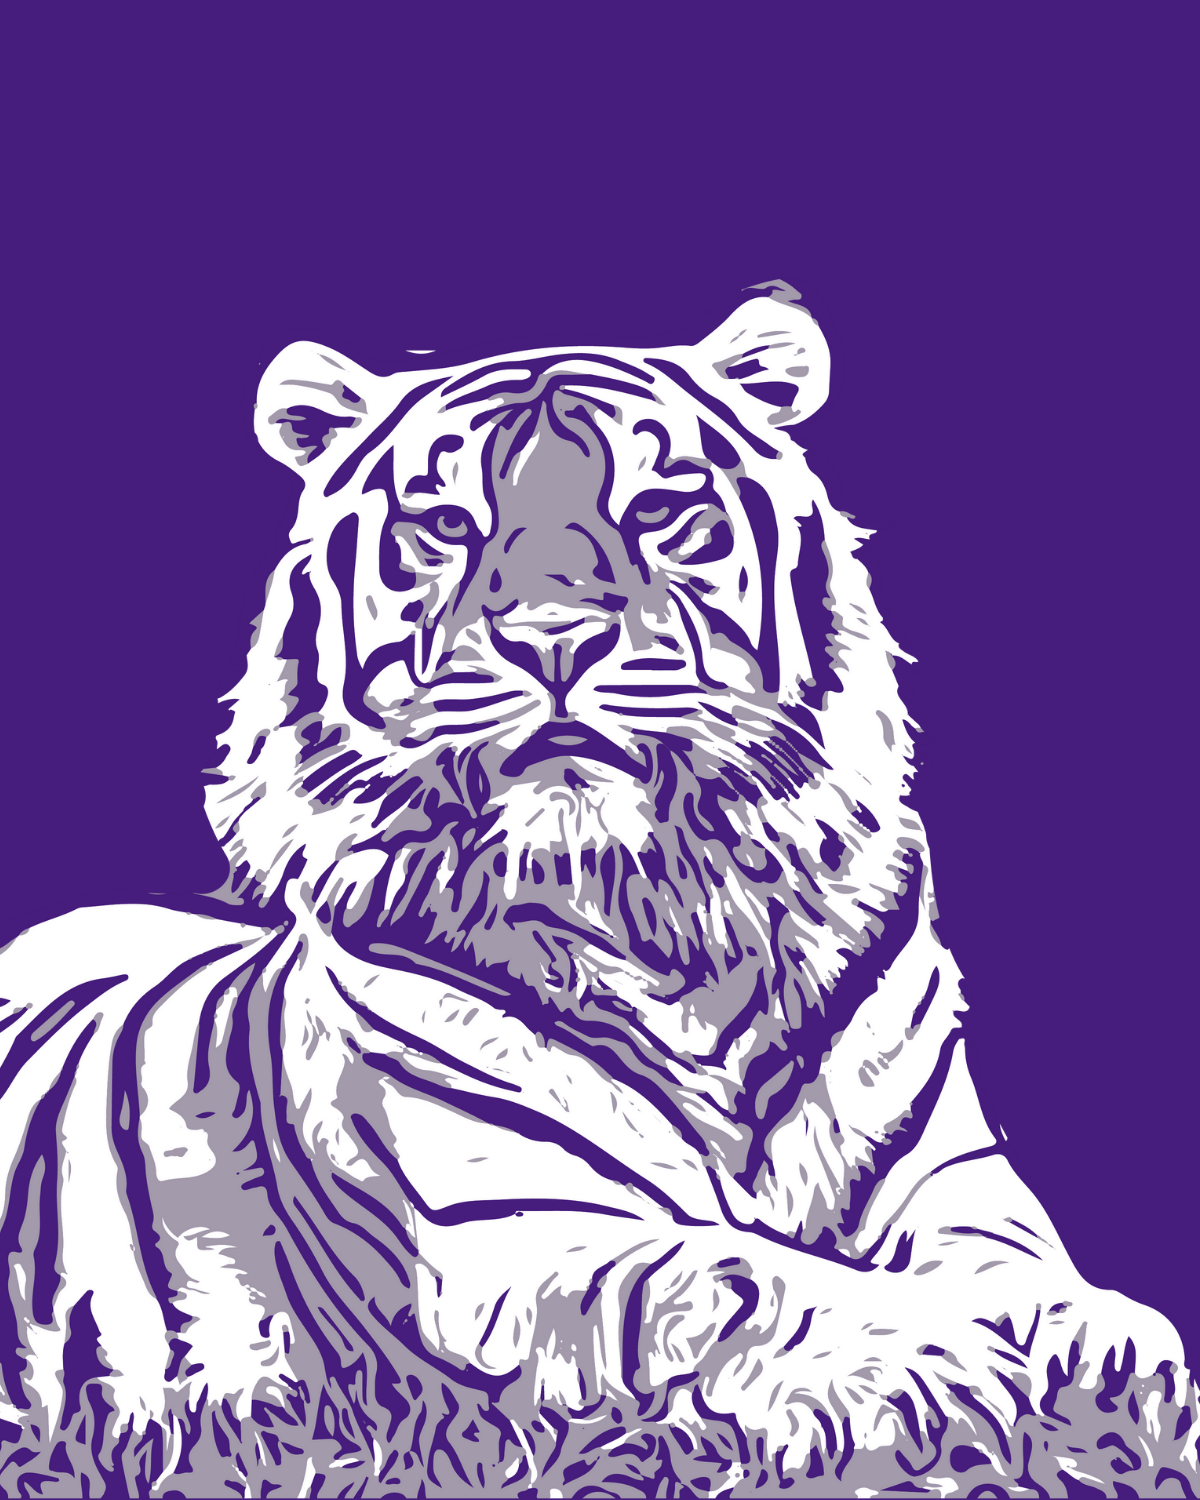 Mike the Tiger graphic